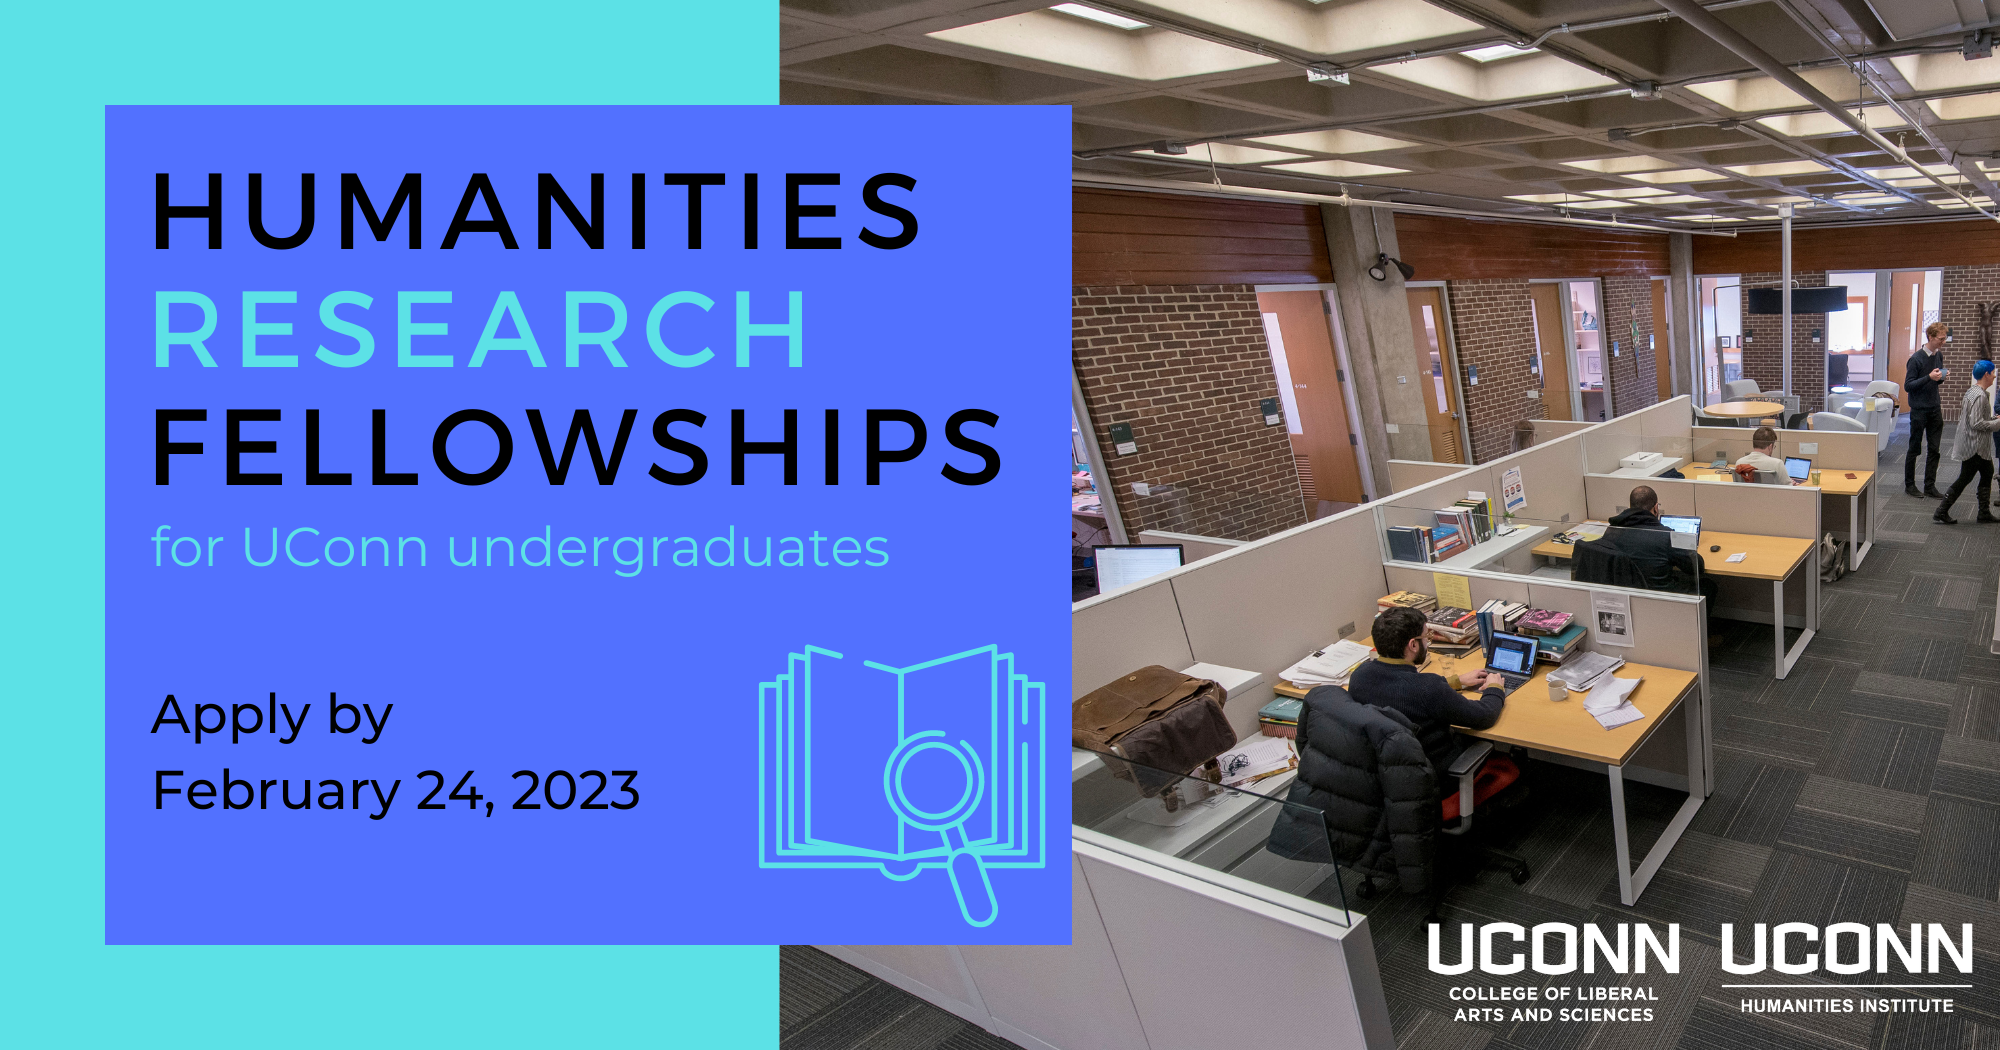 Humanities research fellowships for UConn undergraduates. Apply by February 24, 2023.